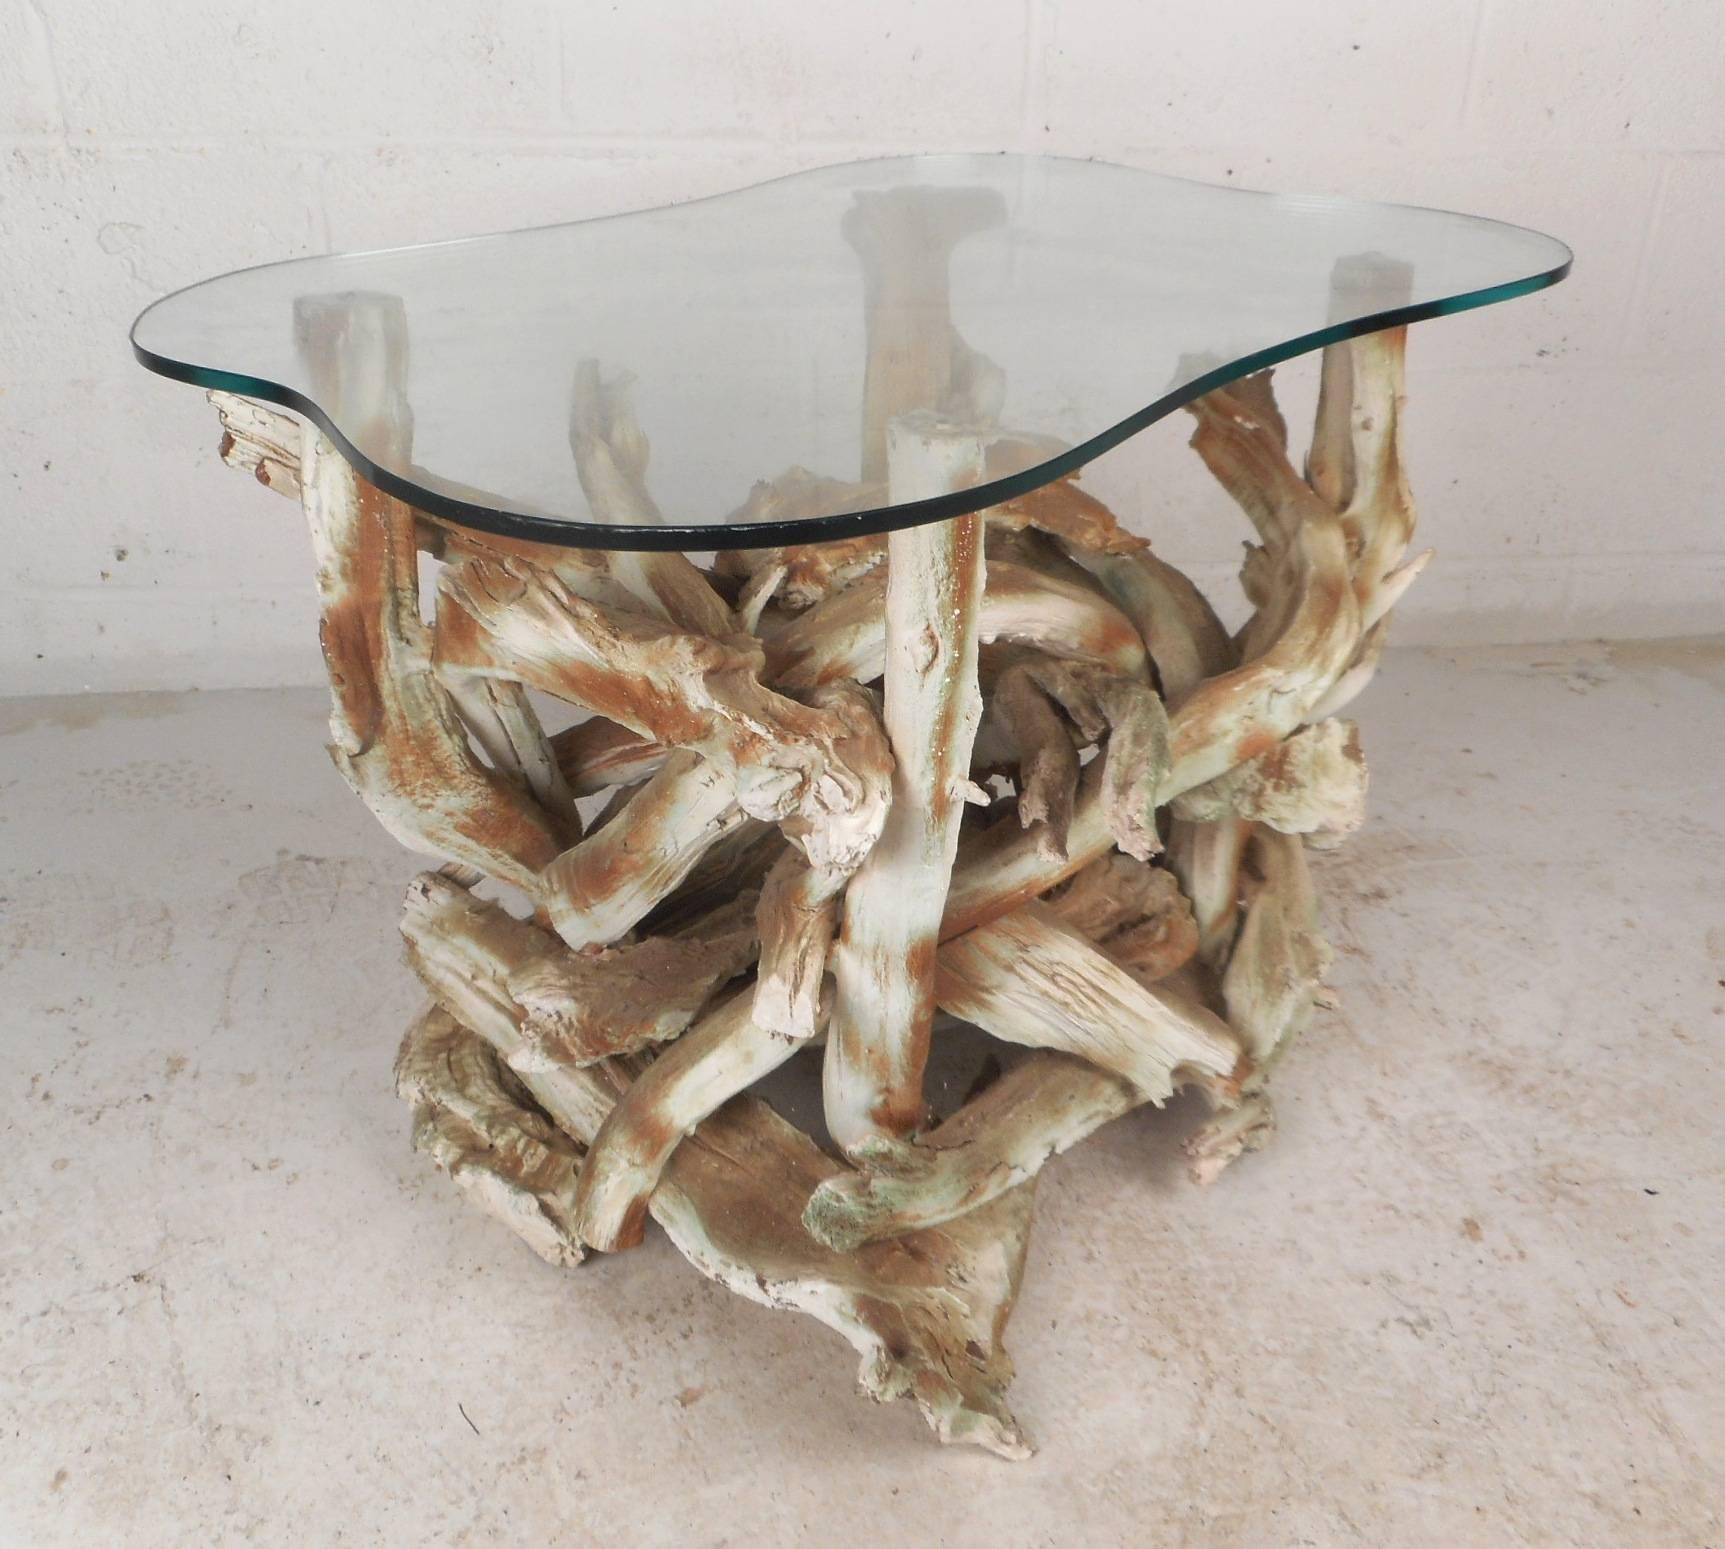 This stunning vintage modern end table features a unique driftwood base with a thick amoeba shaped glass top. Fascinating design with intricate detail and light tints of green on the base. This sturdy and stylish side table makes the perfect